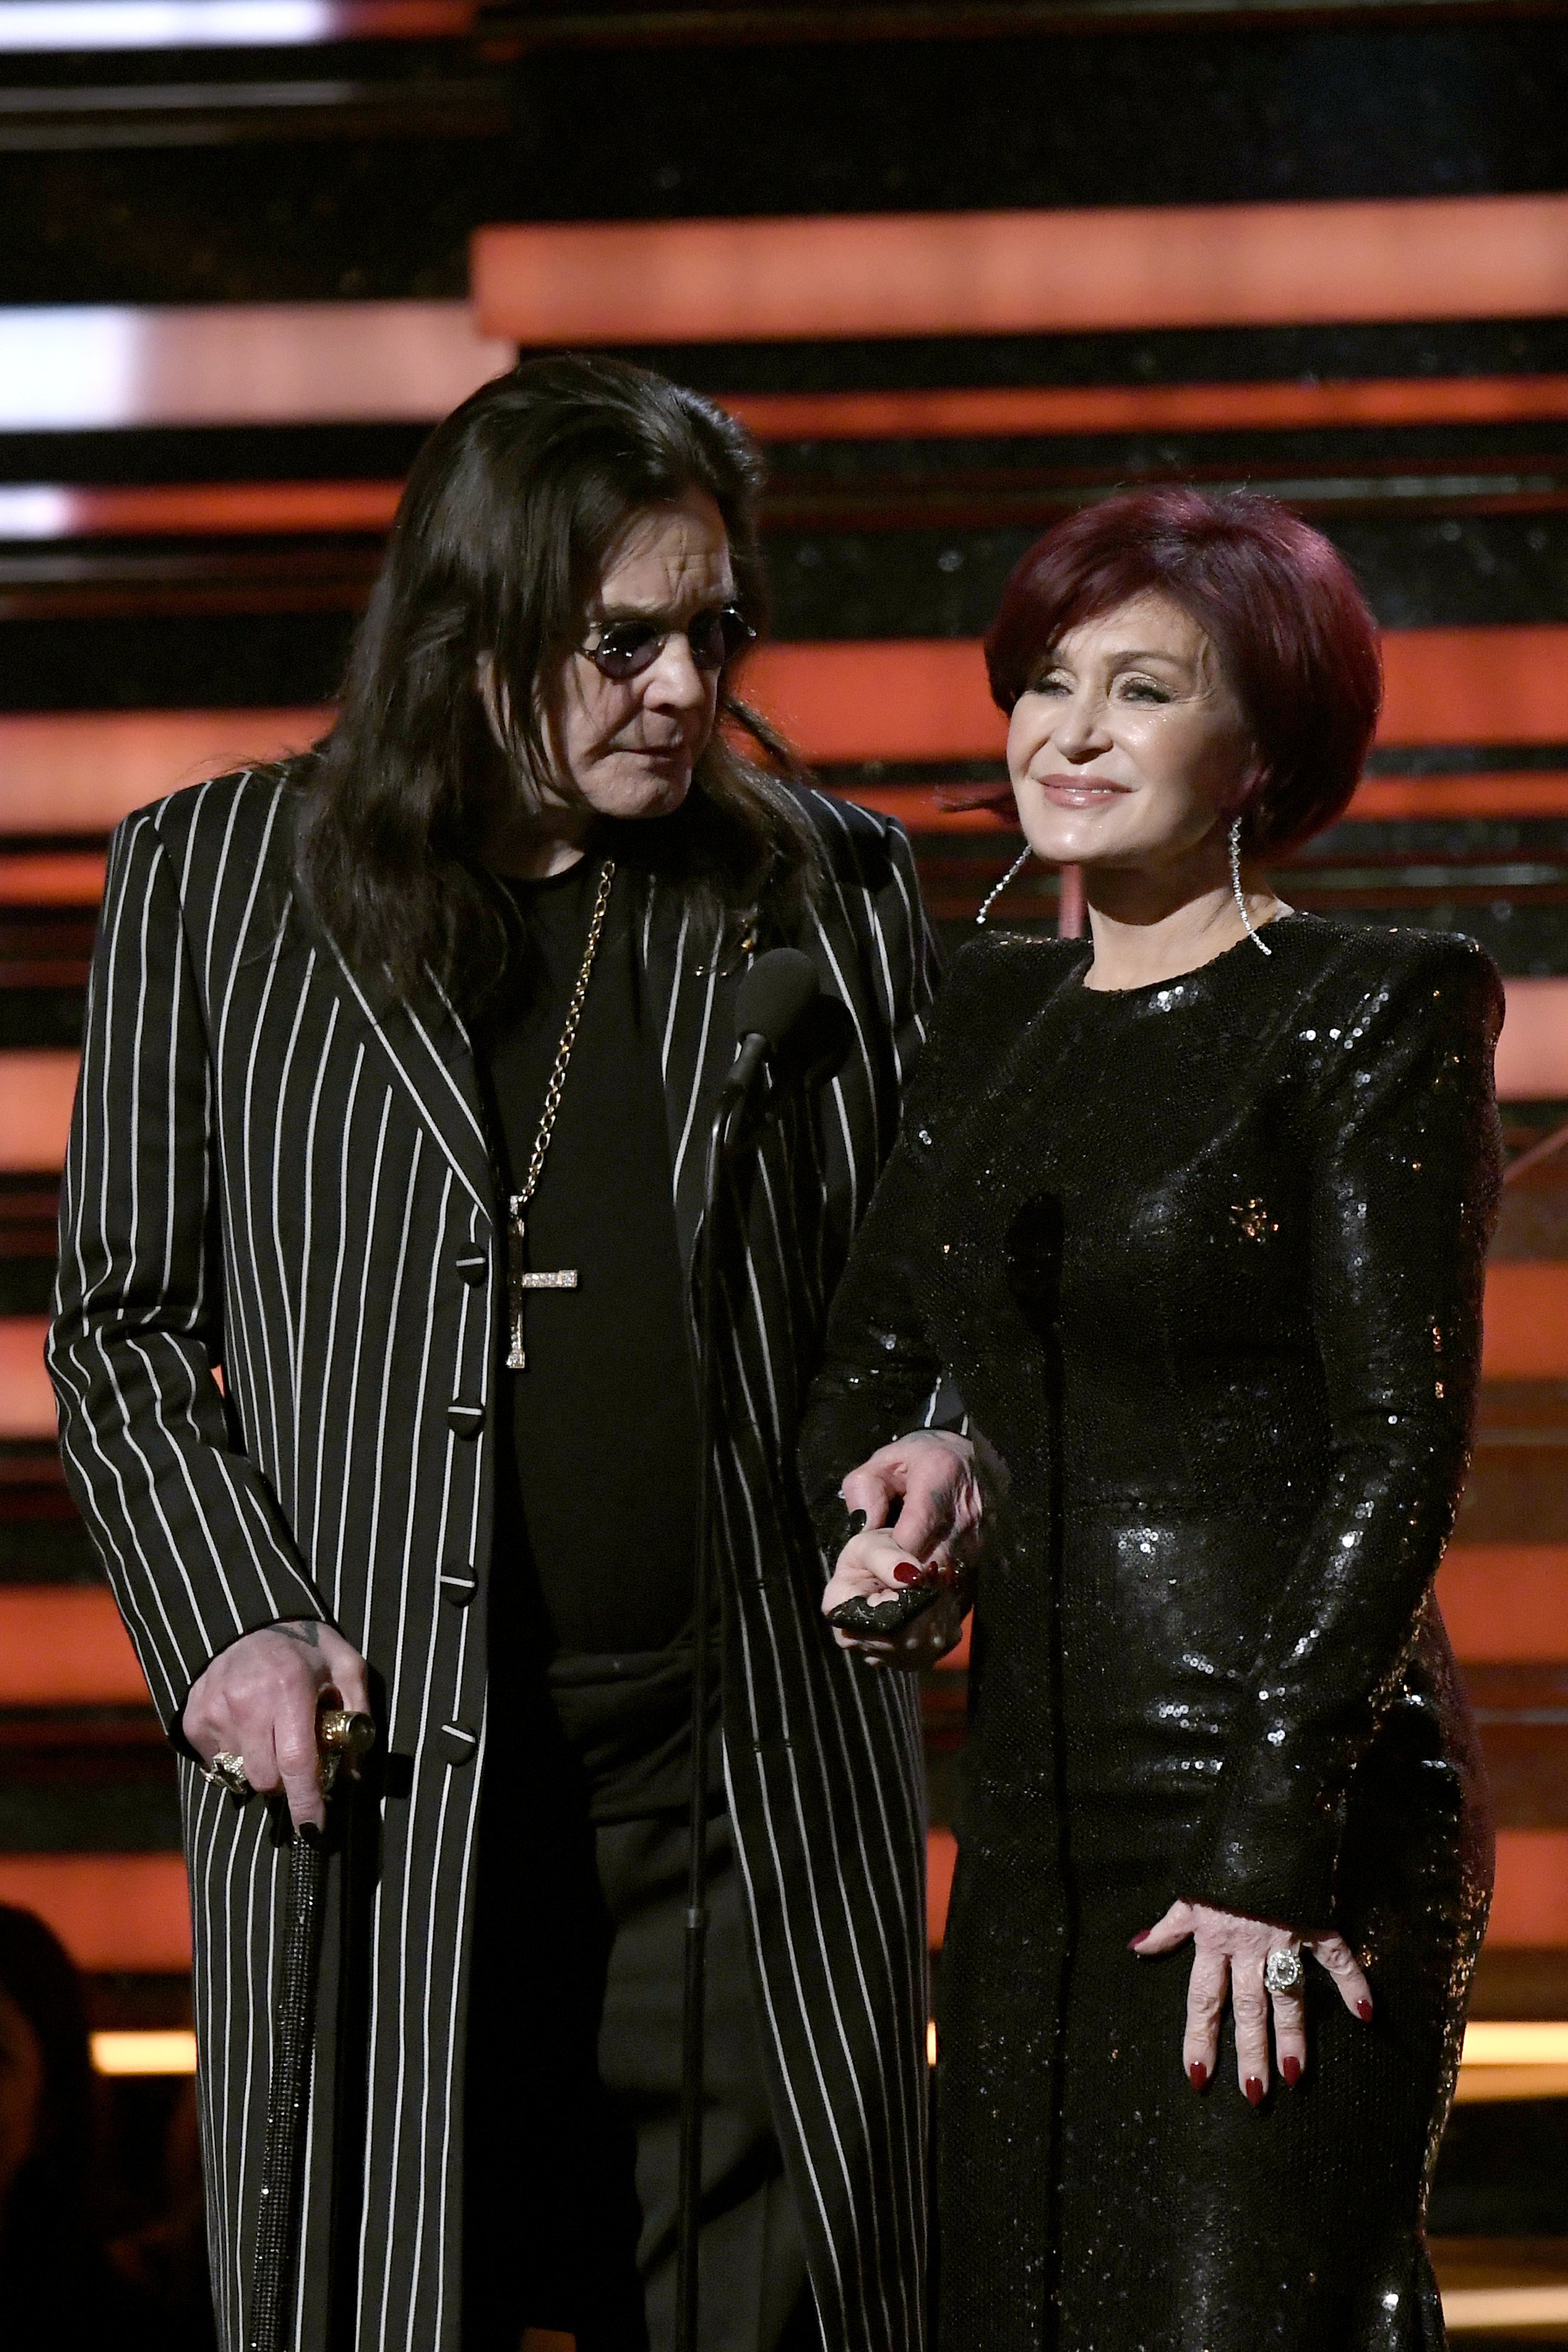 Ozzy Osbourne and Sharon Osbourne onstage during the 62nd Annual GRAMMY Awards at Staples Center on January 26, 2020 in Los Angeles, California | Source: Getty Images